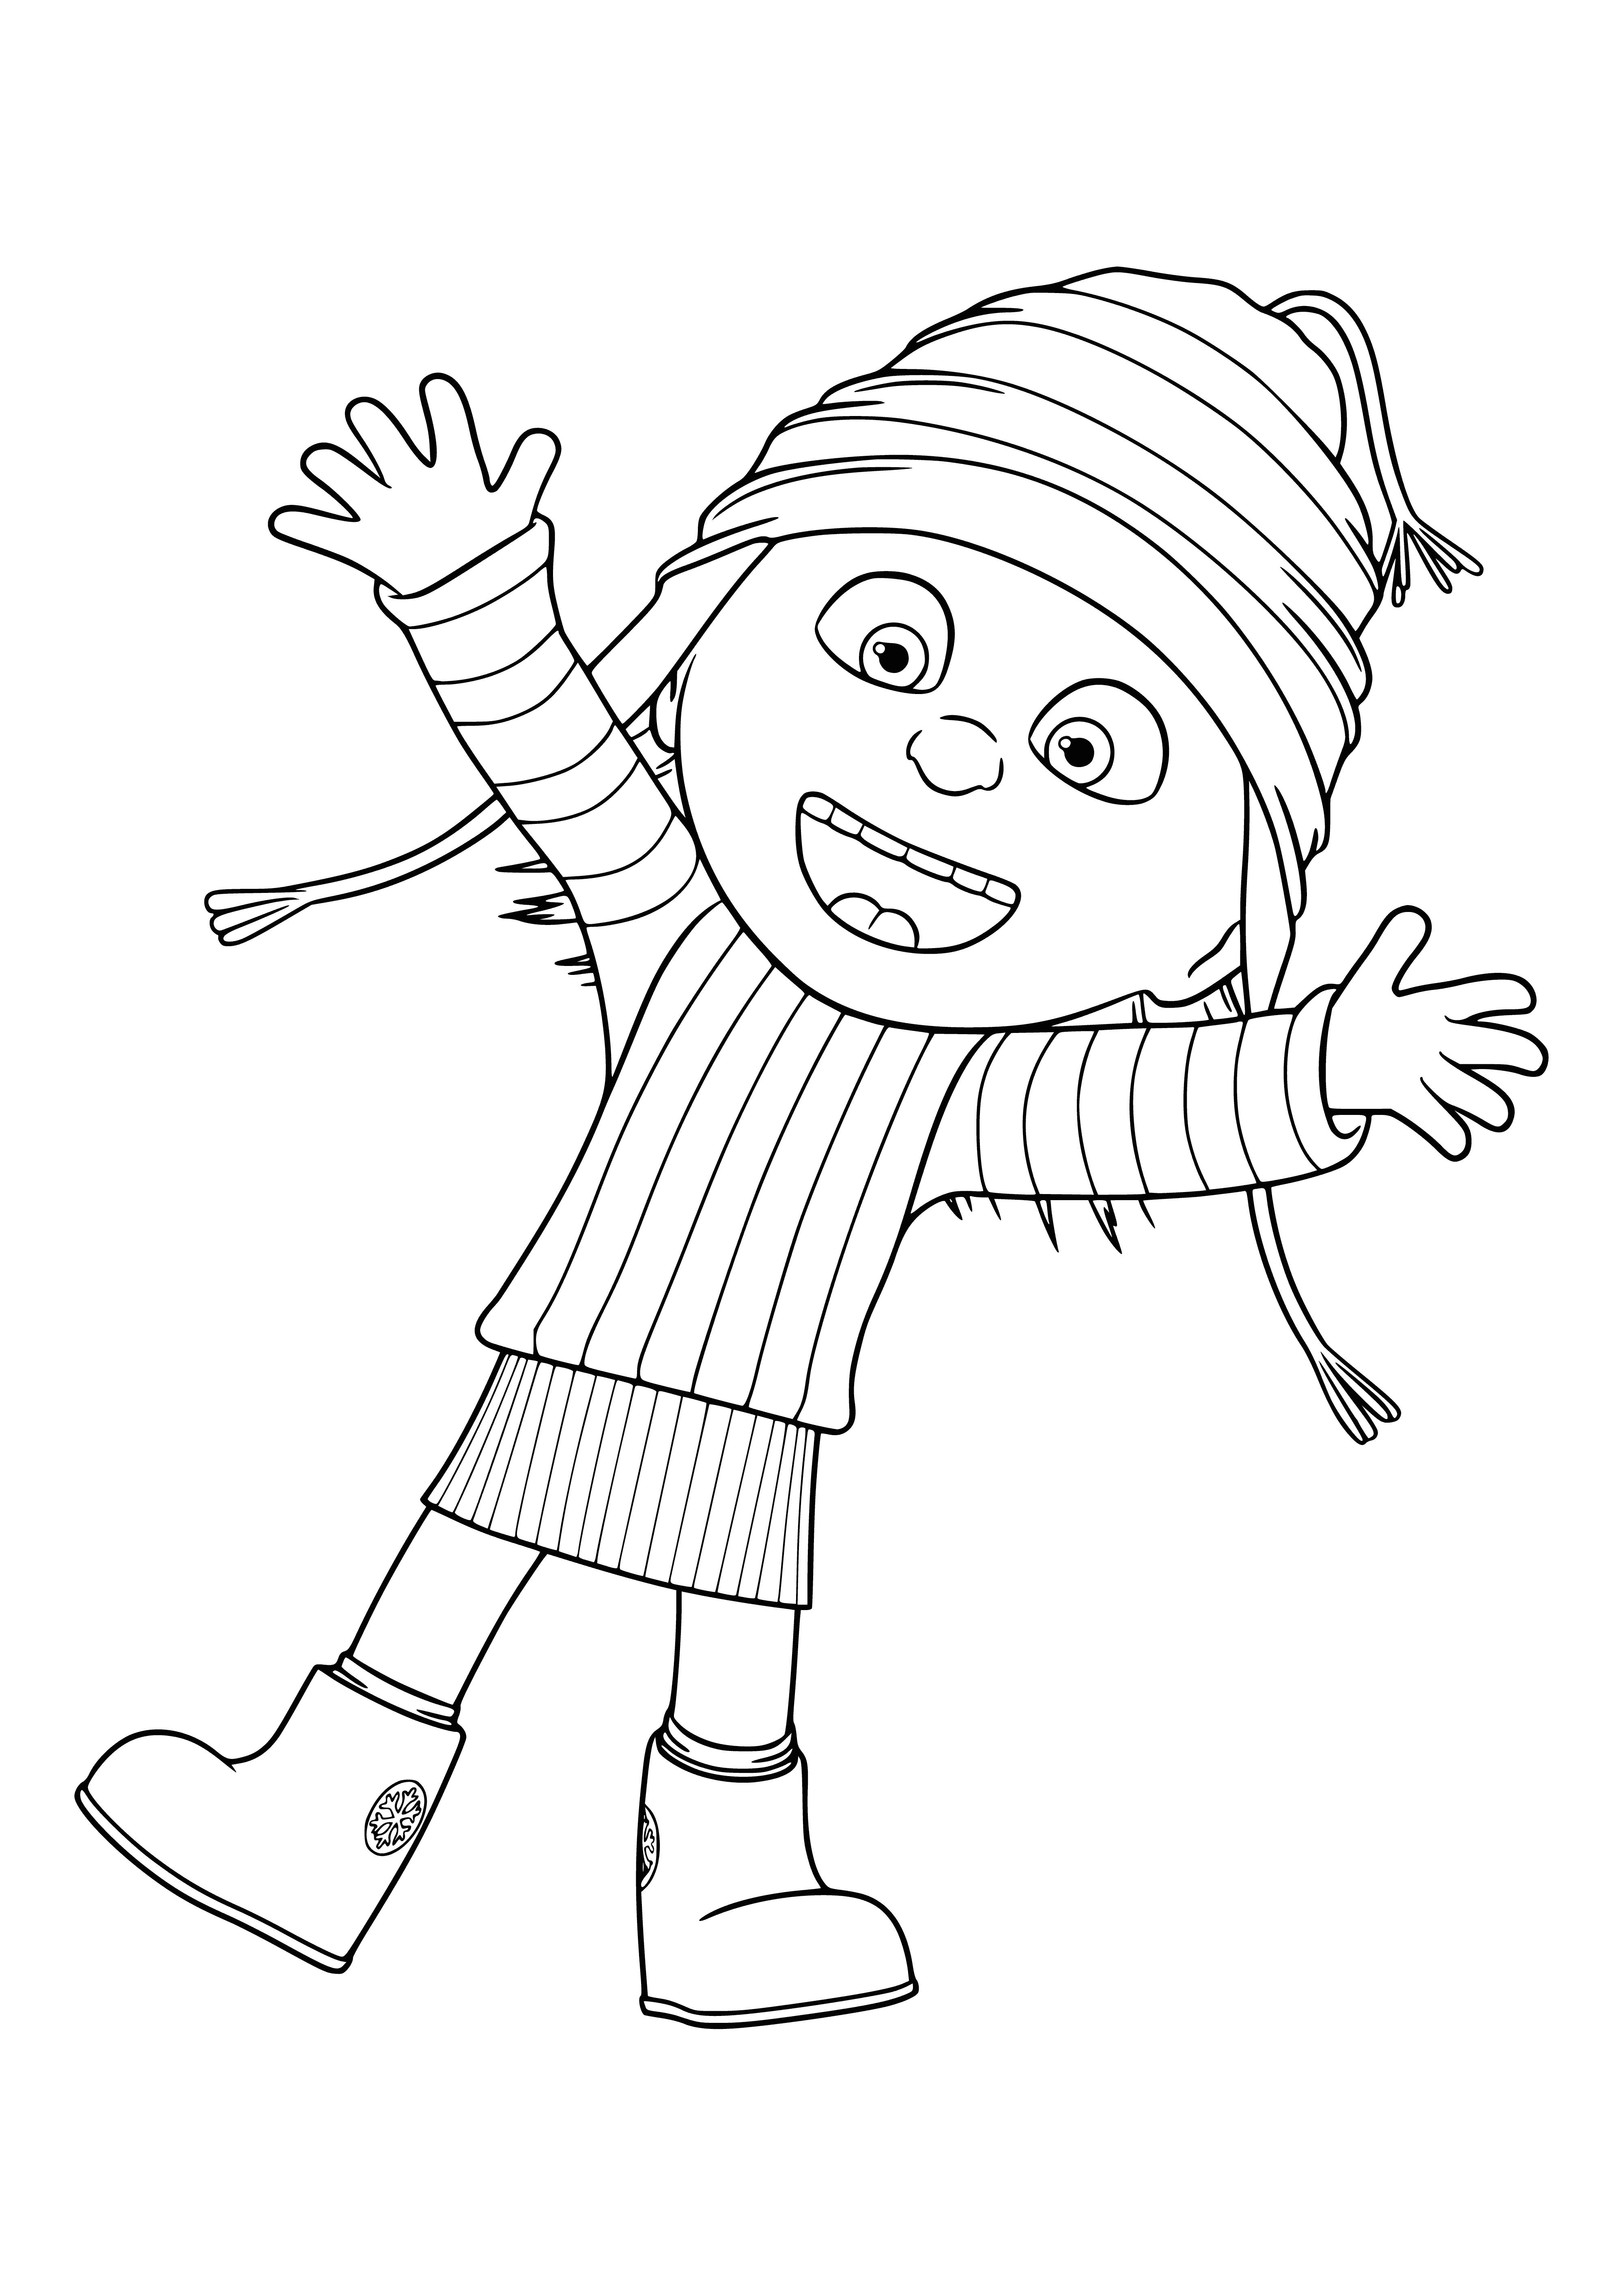 Edith coloring page